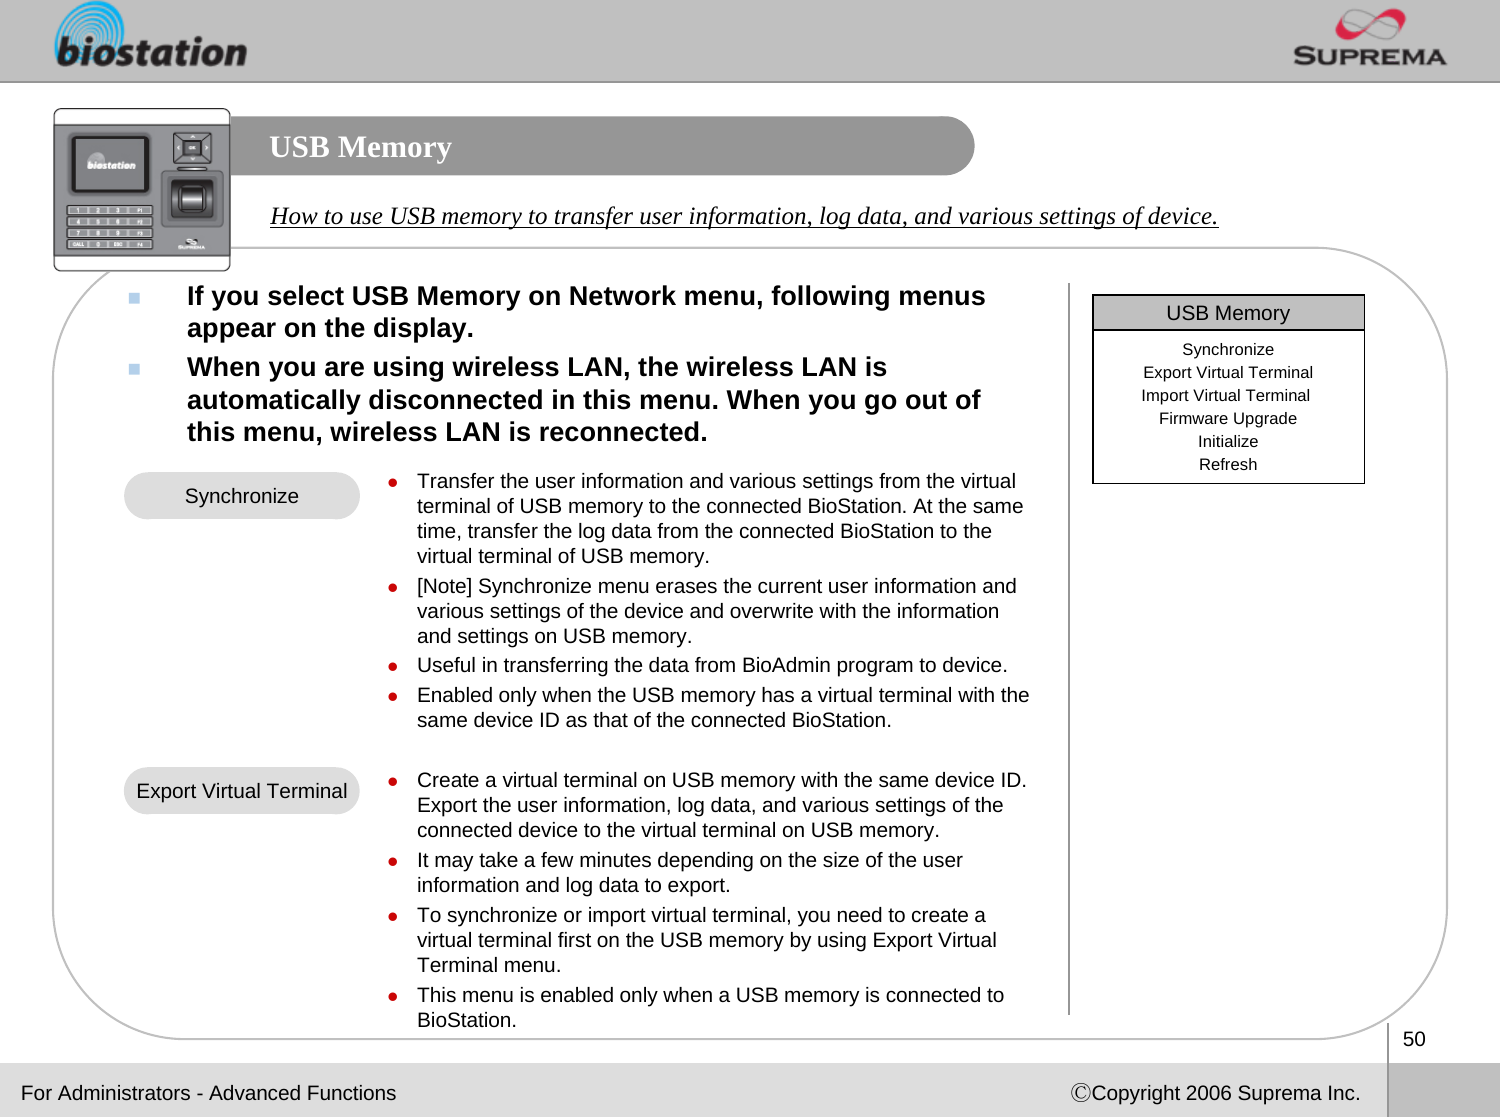 50ⒸCopyright 2006 Suprema Inc.USB MemoryIf you select USB Memory on Network menu, following menus appear on the display. When you are using wireless LAN, the wireless LAN is automatically disconnected in this menu. When you go out of this menu, wireless LAN is reconnected.How to use USB memory to transfer user information, log data, and various settings of device. For Administrators - Advanced FunctionszTransfer the user information and various settings from the virtual terminal of USB memory to the connected BioStation. At the same time, transfer the log data from the connected BioStation to thevirtual terminal of USB memory. z[Note] Synchronize menu erases the current user information and various settings of the device and overwrite with the information and settings on USB memory.  zUseful in transferring the data from BioAdmin program to device.zEnabled only when the USB memory has a virtual terminal with thesame device ID as that of the connected BioStation. zCreate a virtual terminal on USB memory with the same device ID.Export the user information, log data, and various settings of the connected device to the virtual terminal on USB memory. zIt may take a few minutes depending on the size of the user information and log data to export. zTo synchronize or import virtual terminal, you need to create a virtual terminal first on the USB memory by using Export VirtualTerminal menu. zThis menu is enabled only when a USB memory is connected to BioStation.SynchronizeExport Virtual TerminalUSB MemorySynchronizeExport Virtual TerminalImport Virtual Terminal Firmware UpgradeInitializeRefresh